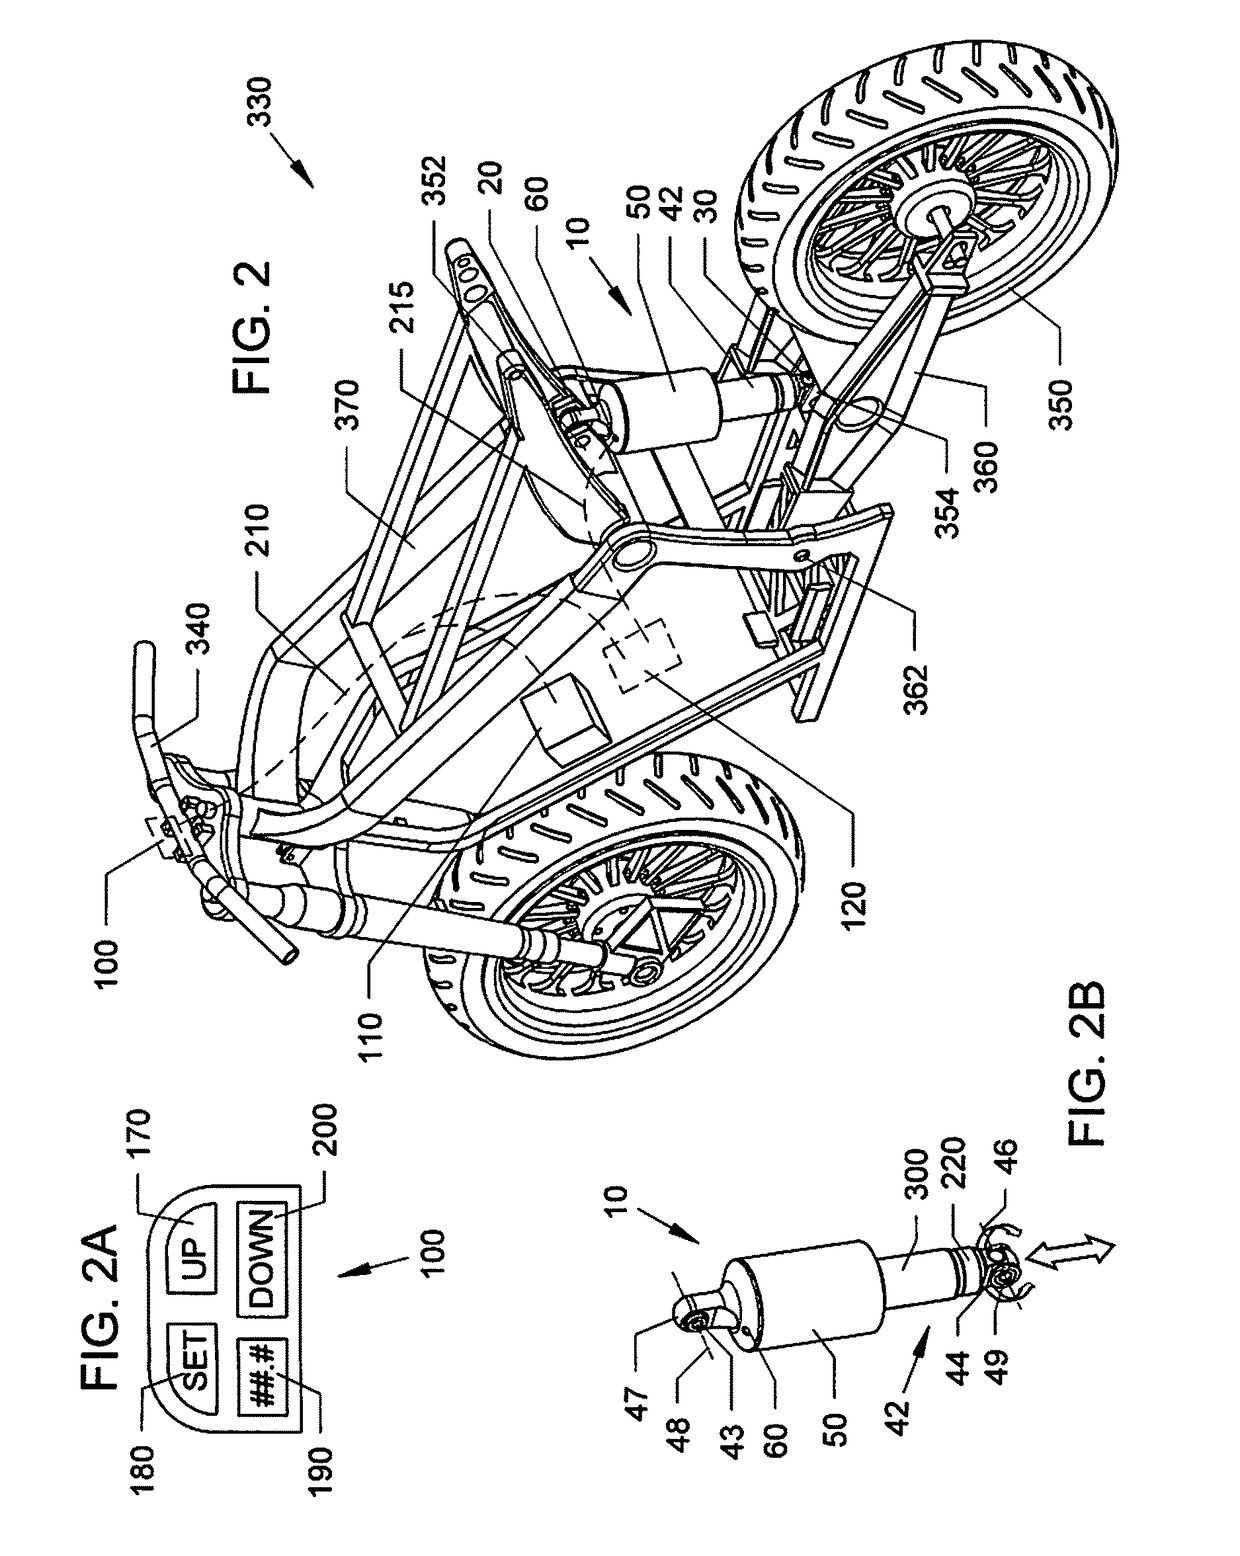 Shock apparatus, method and system for all vehicles